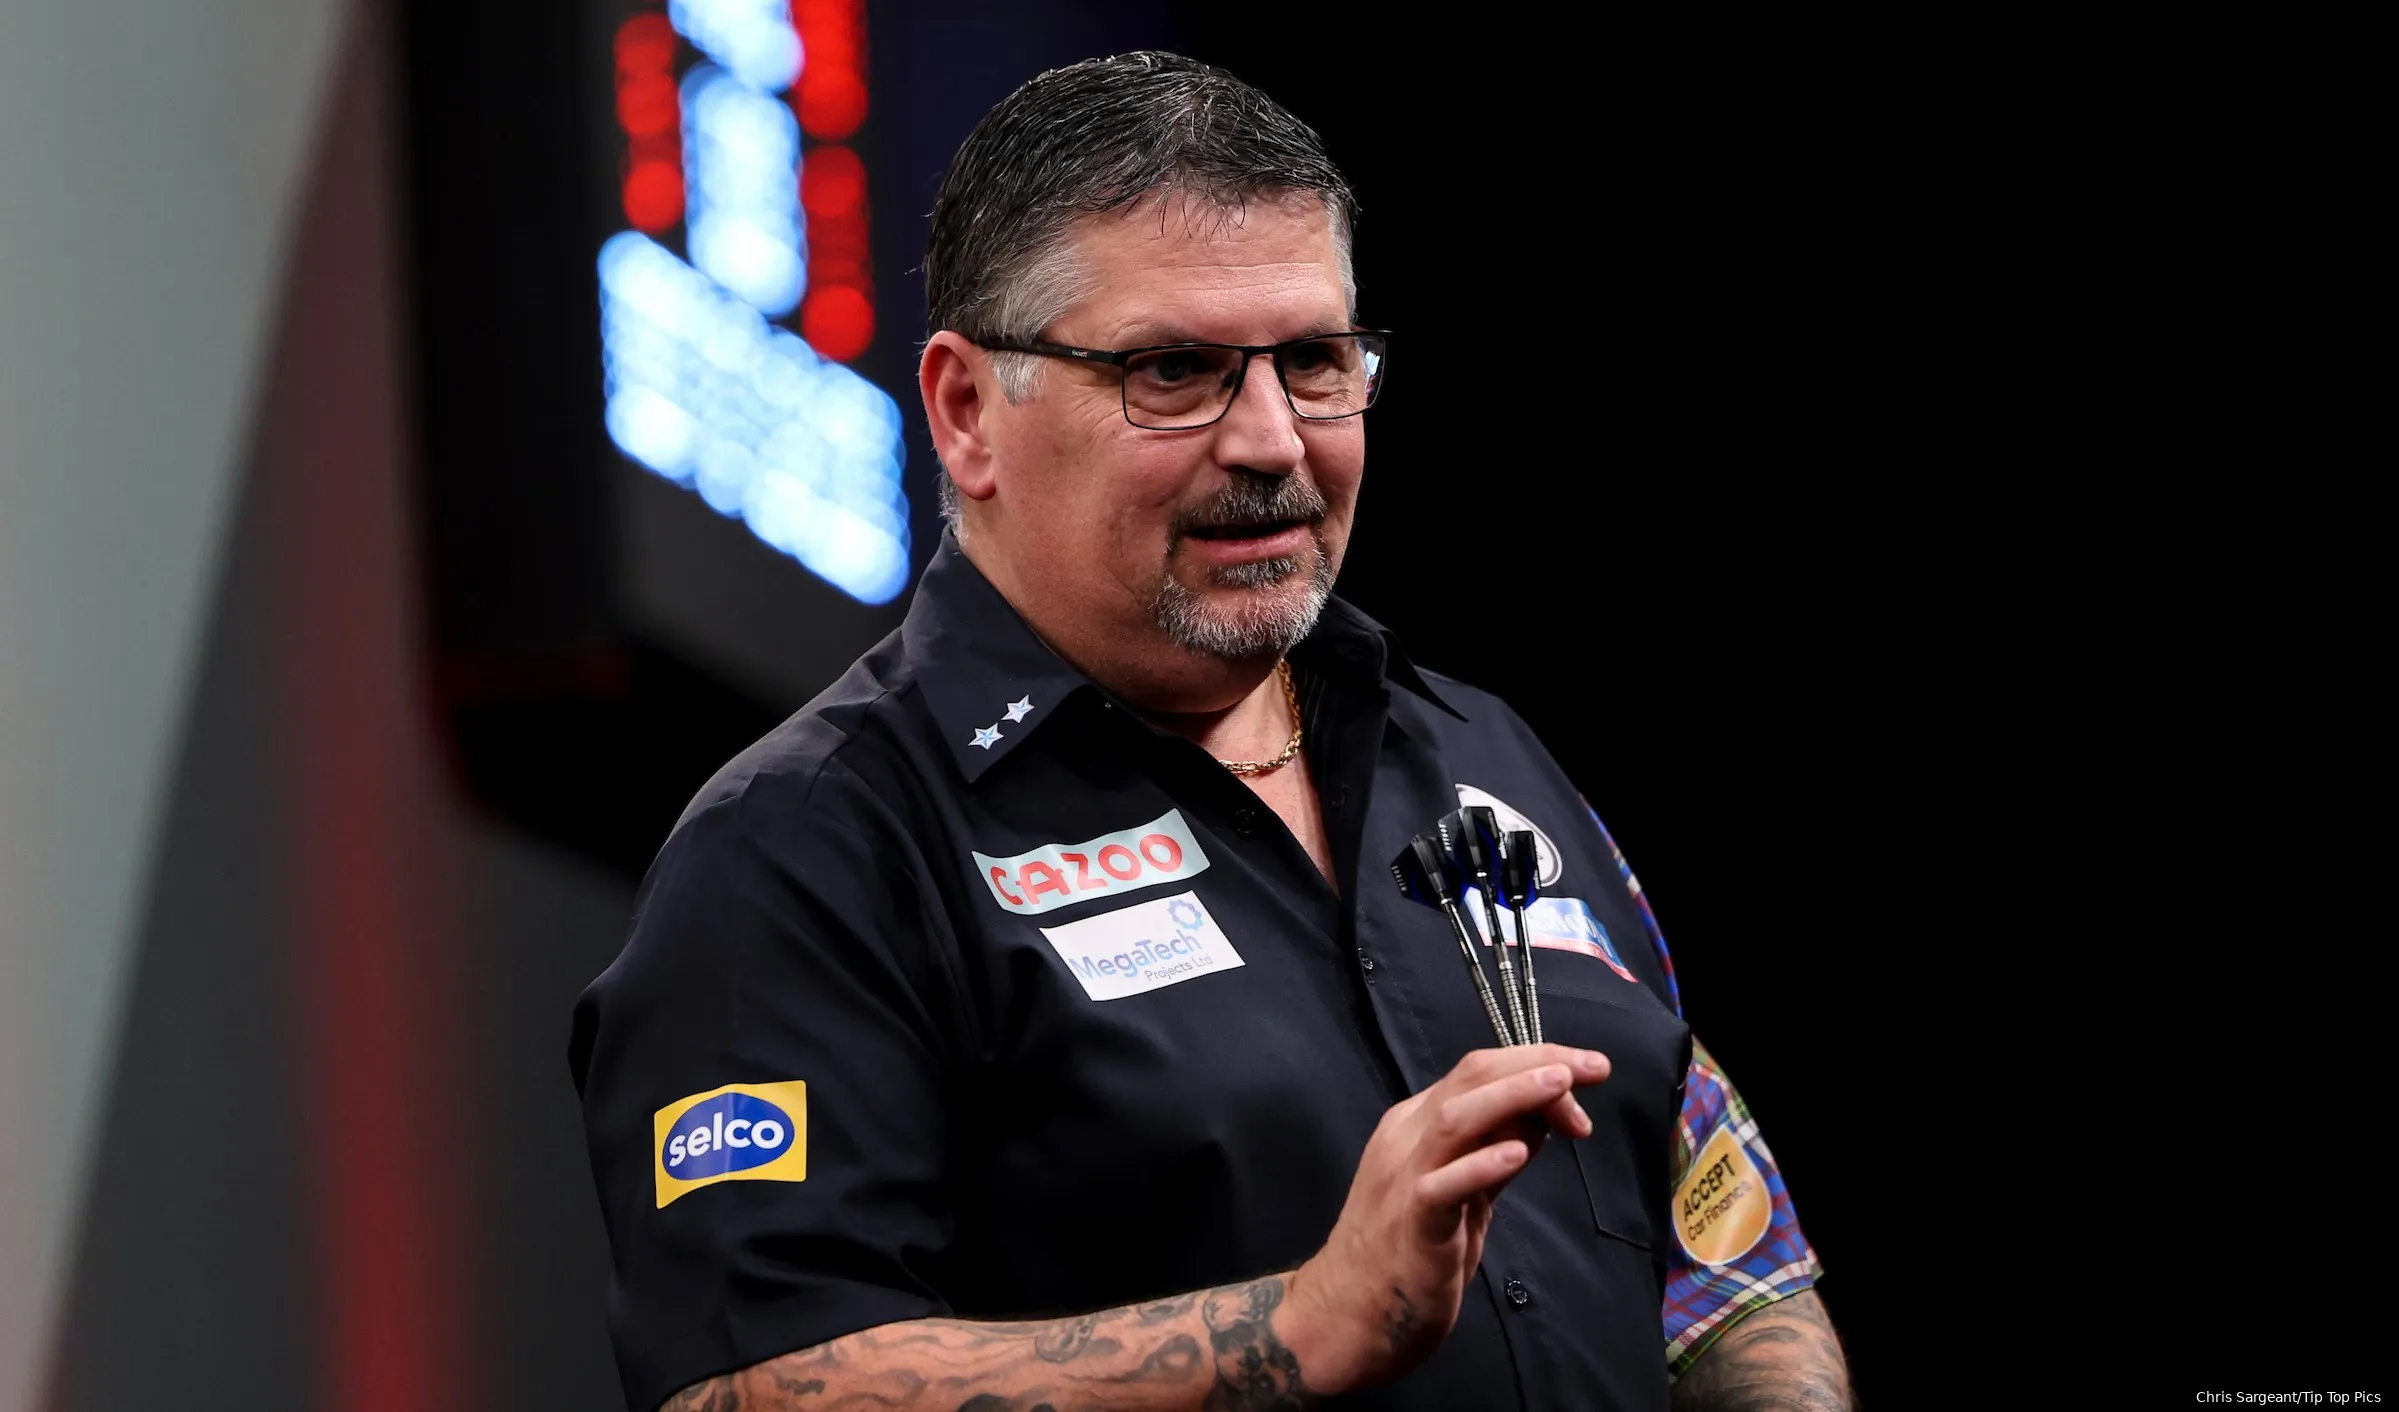 gary anderson cazoo pdc mastrers 2023 0747 63d58cc3df305